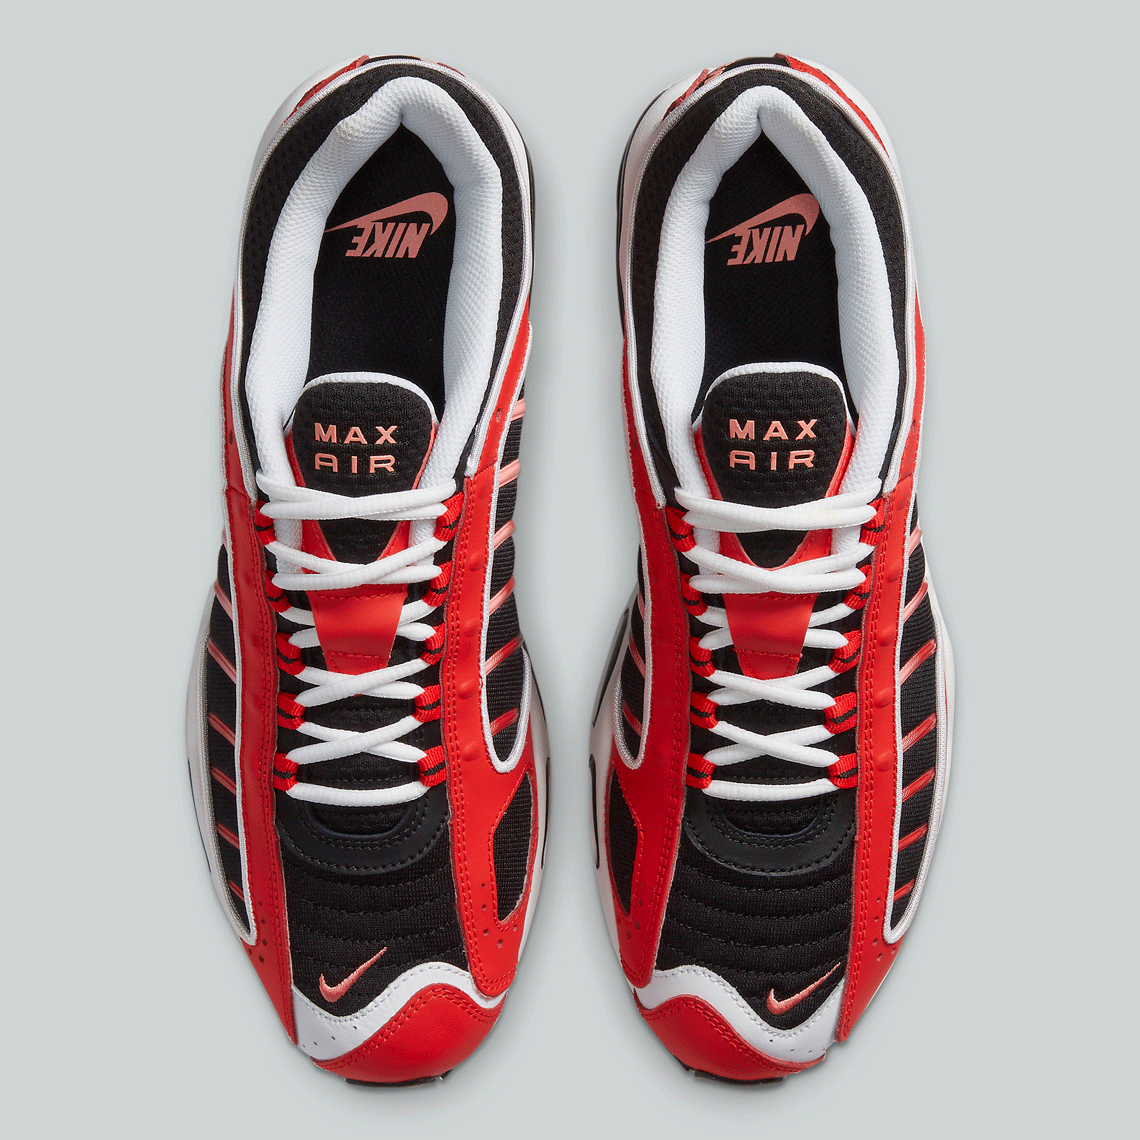 Nike Air Max Tailwind IV Chile Red CT1284-600 | SneakerNews.com